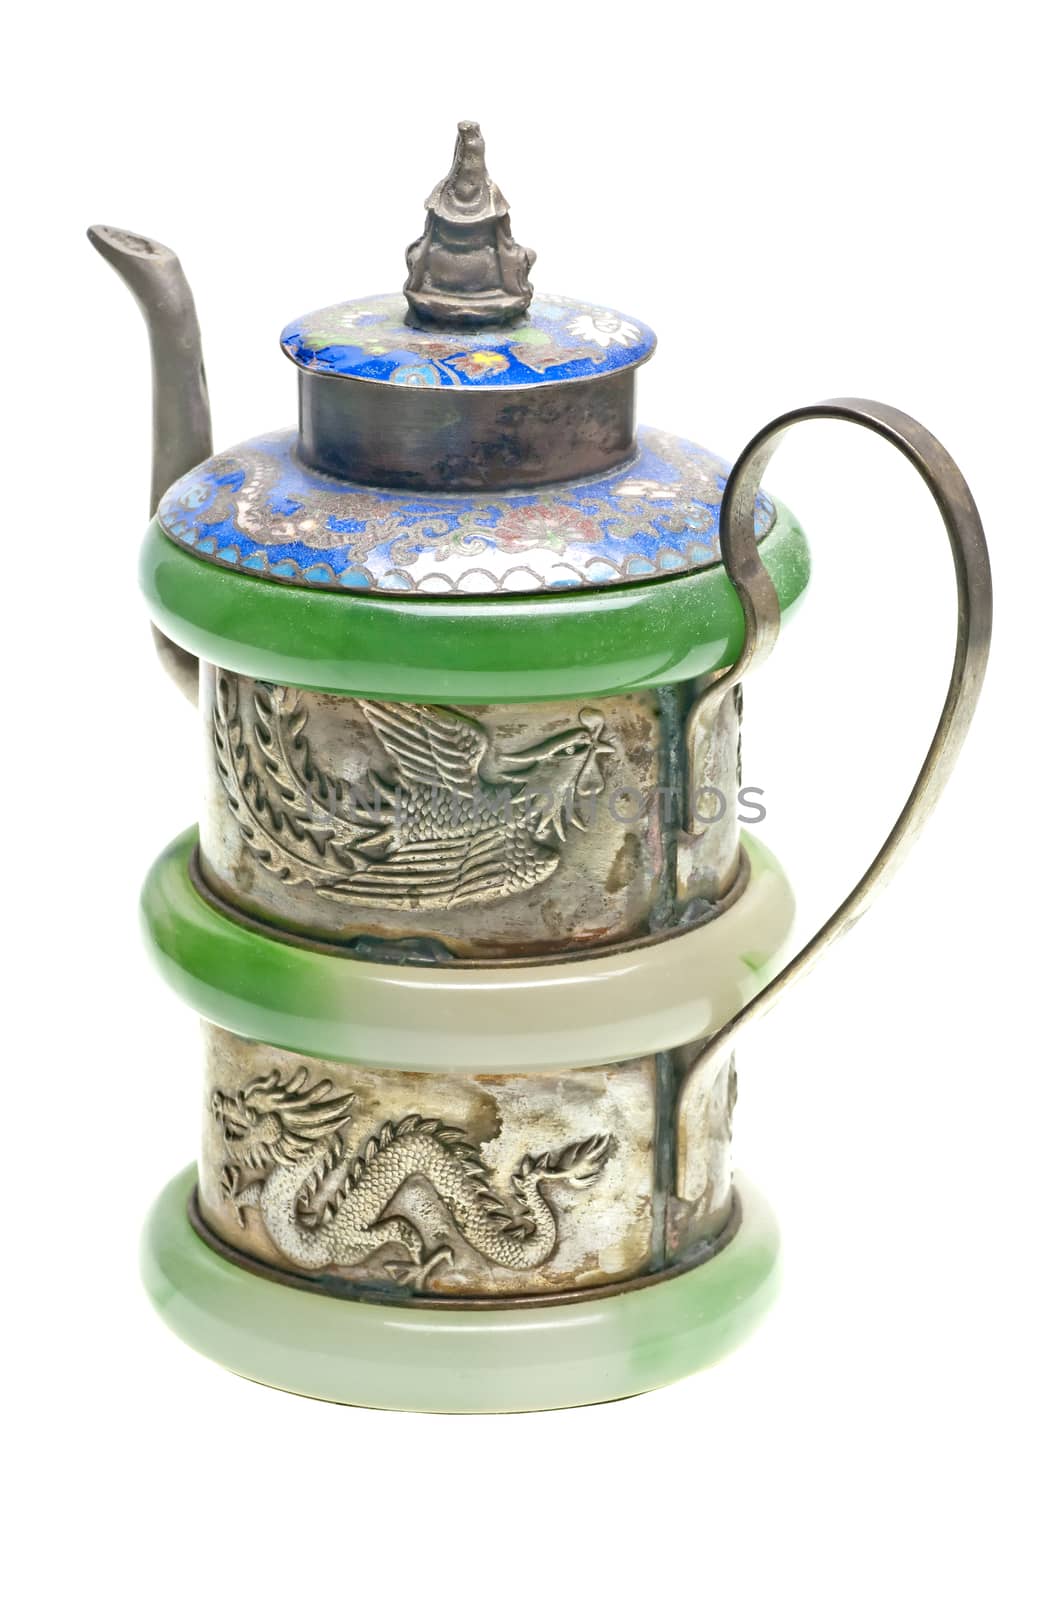 old chinese teapot by Jochen